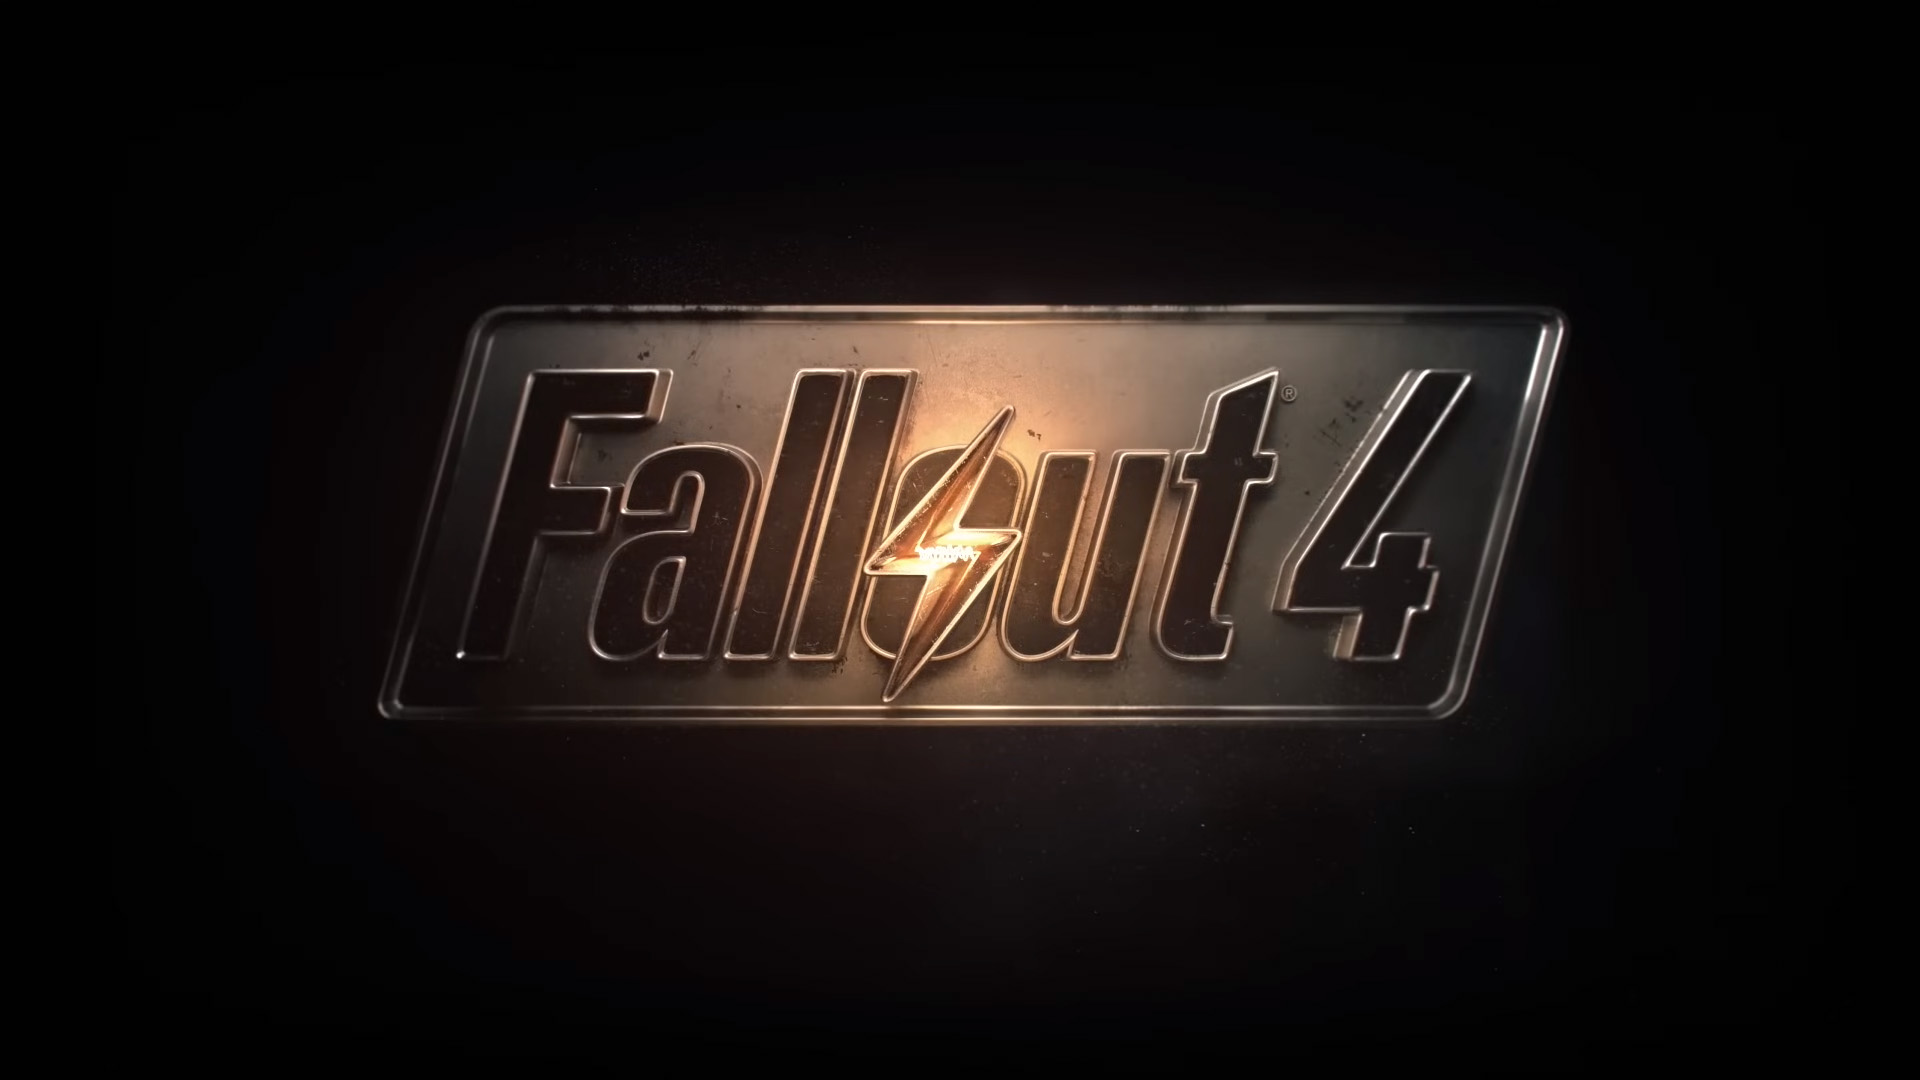 Fallout 4 Free Upgrade – Next-Gen Consoles, New Quest, Armor, Weapons